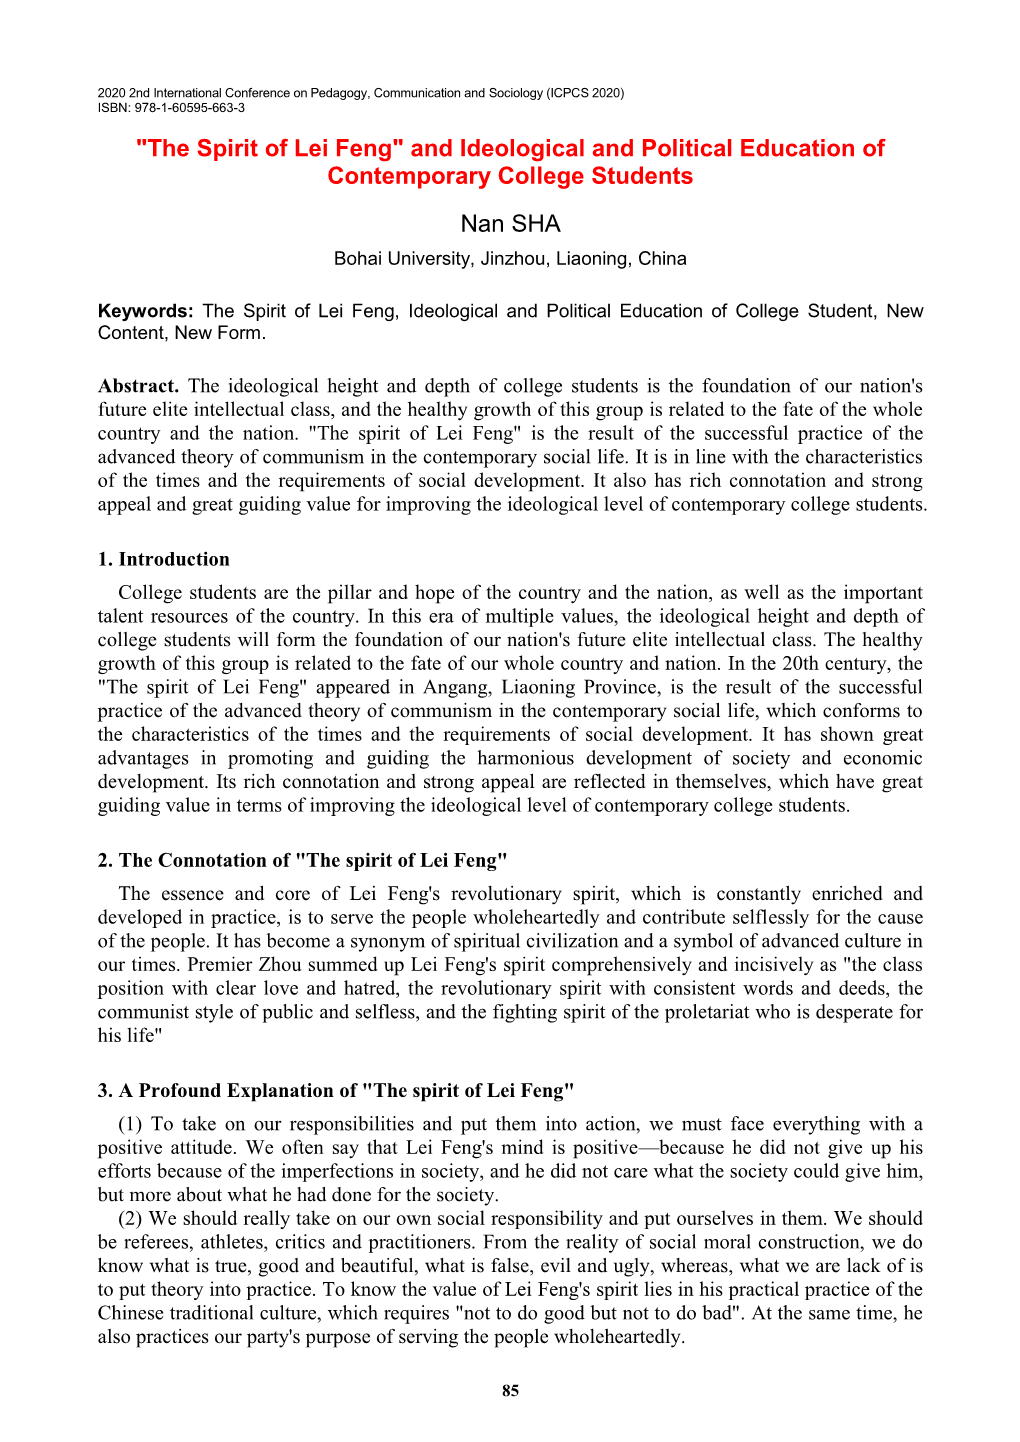 The Spirit of Lei Feng" and Ideological and Political Education of Contemporary College Students Nan SHA Bohai University, Jinzhou, Liaoning, China